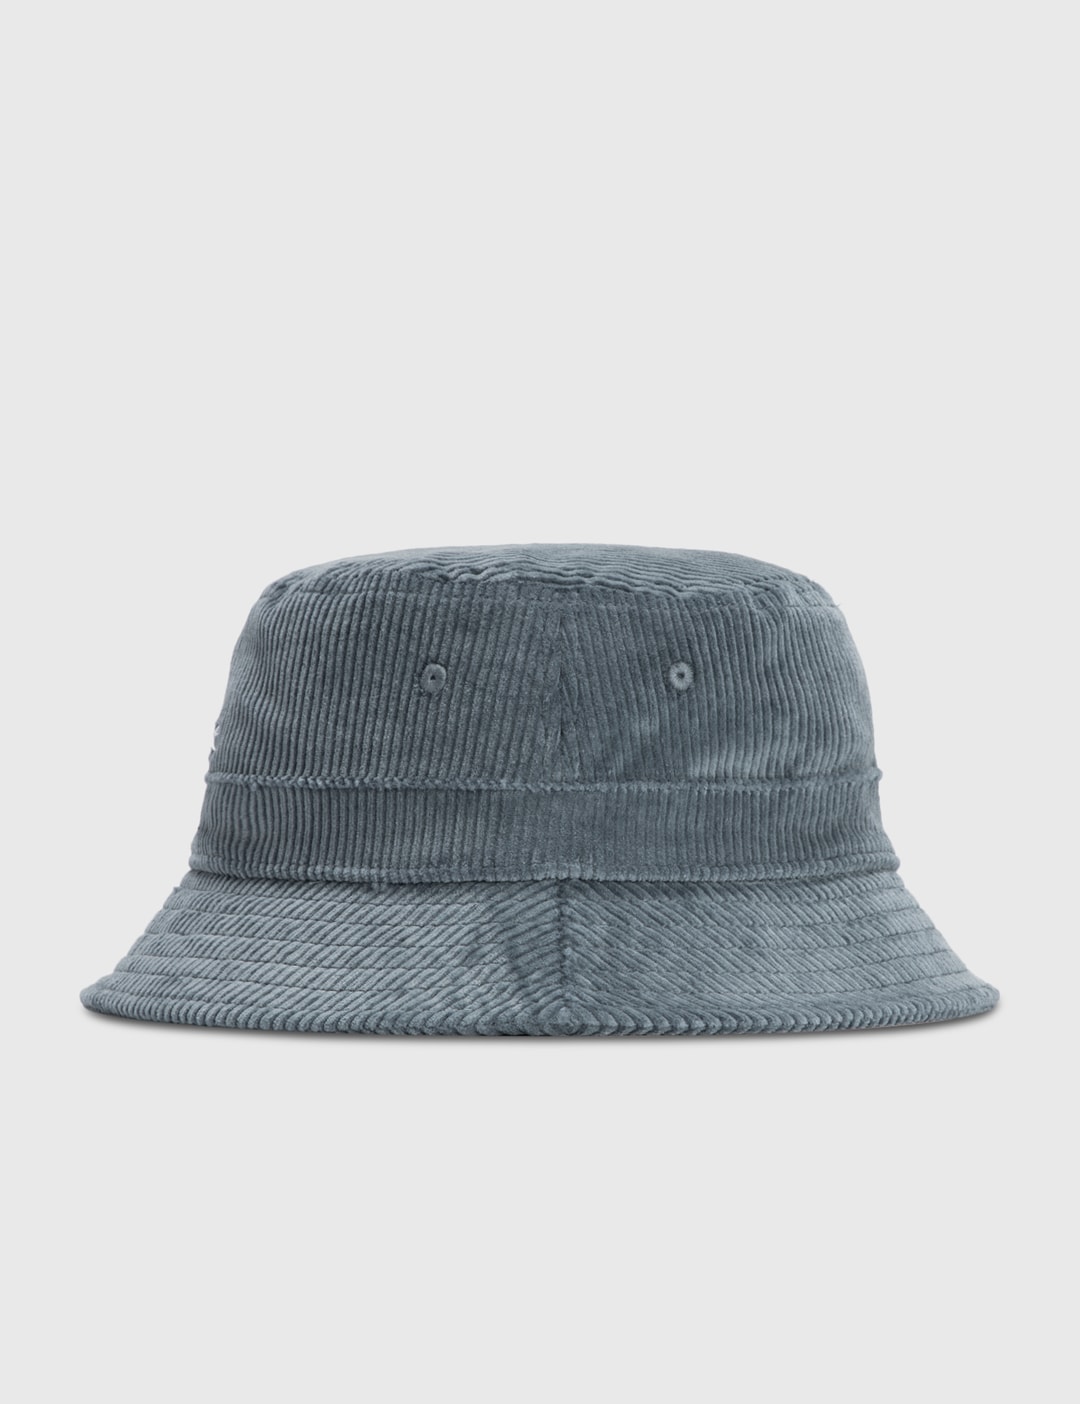 Dime - Dime Cord Bucket Hat | HBX - Globally Curated Fashion and ...